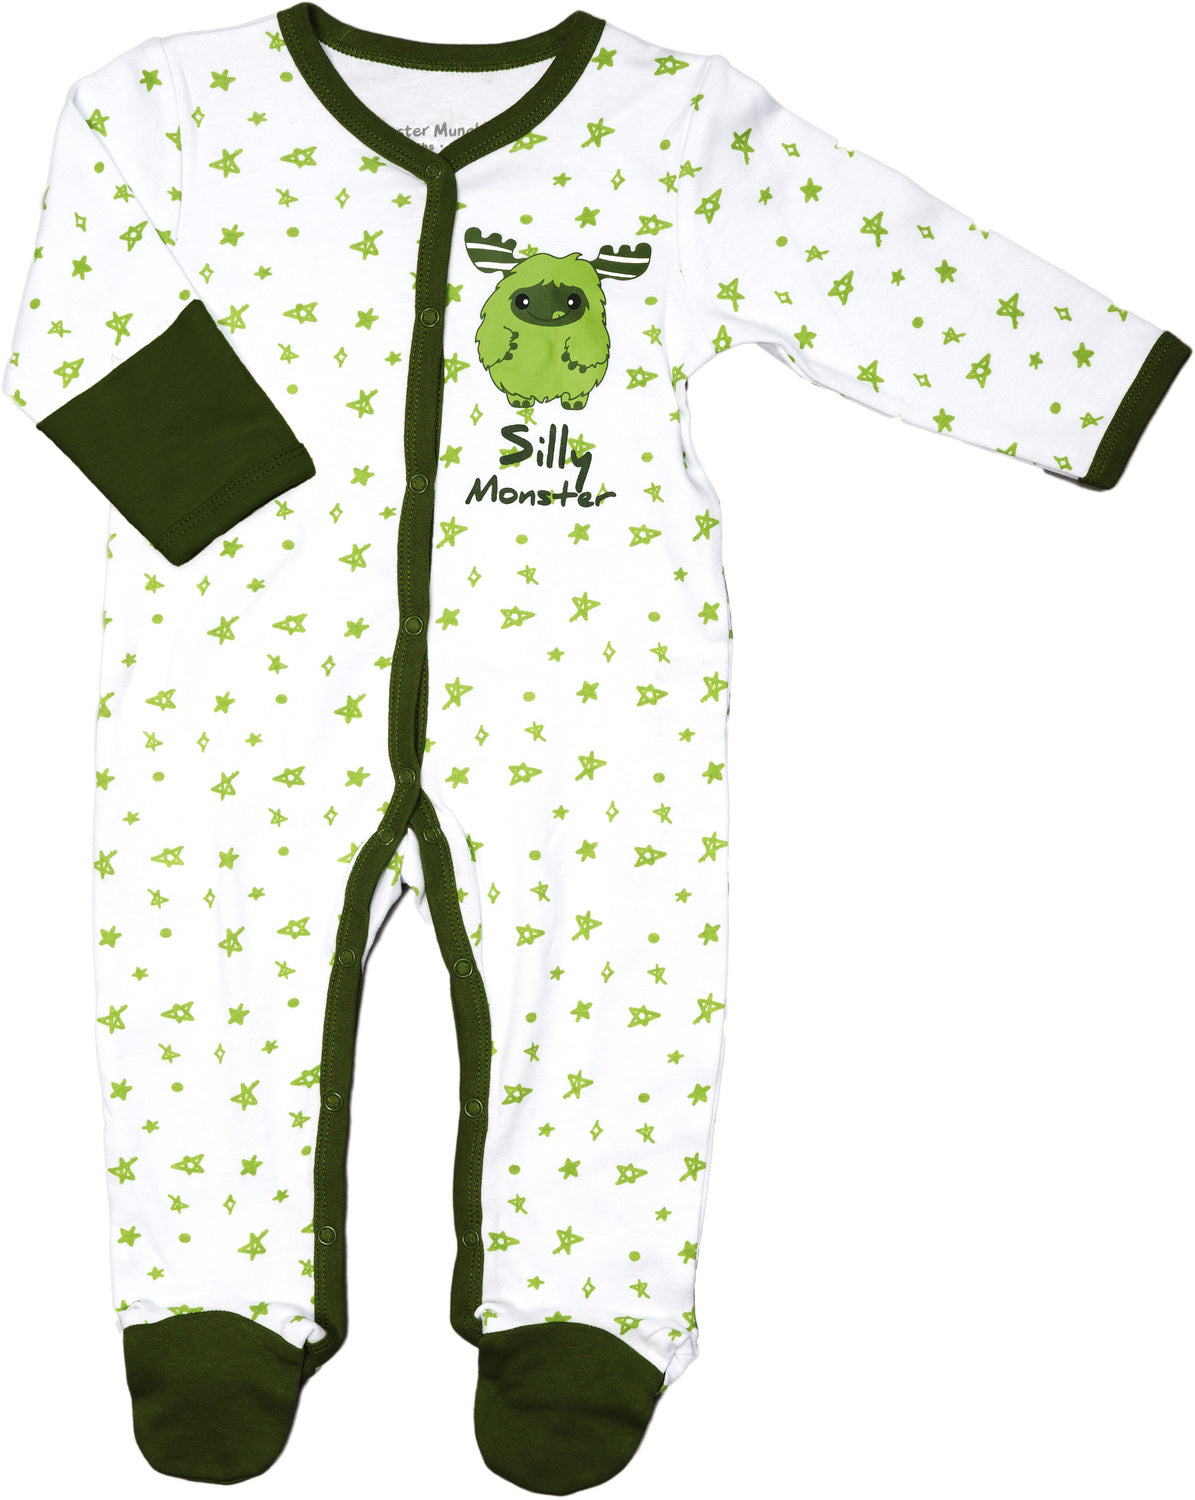 Silly Monster Pajamas by Monster Munchkins